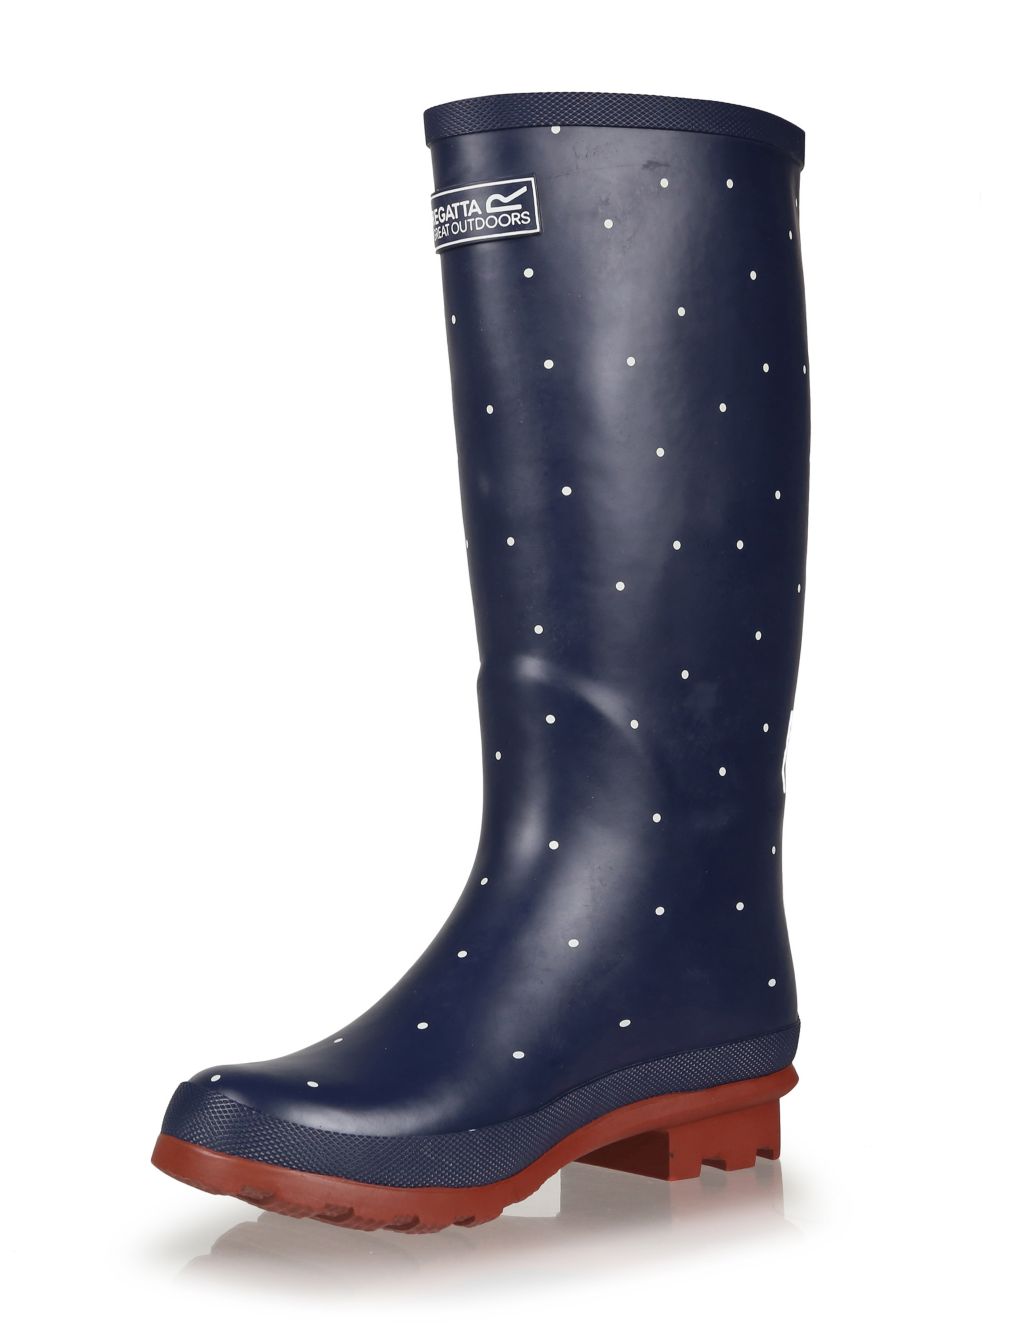 Lady Fairweather II Patterned Wellies image 3